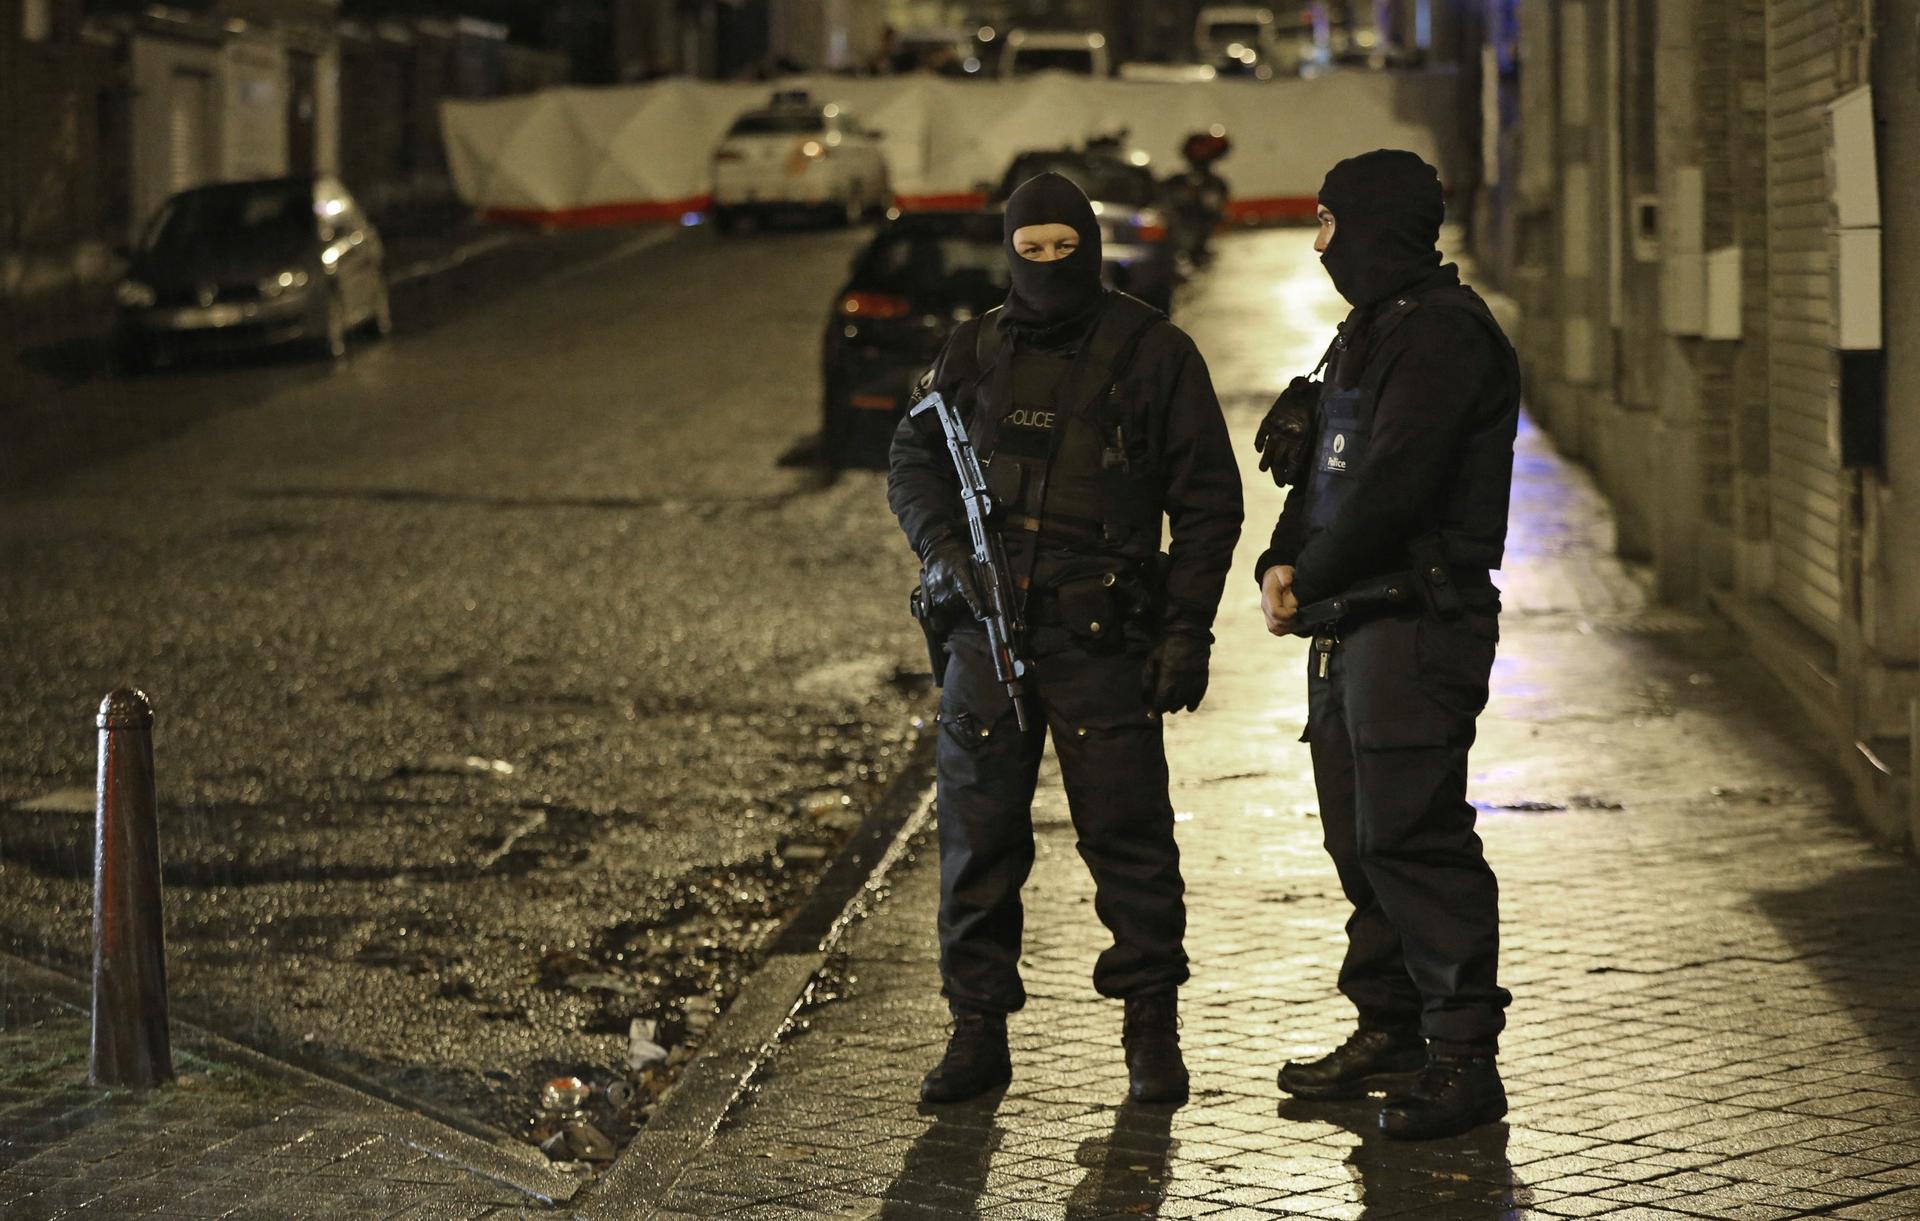 An increasingly common sight across Europe, heavily armed security forces on guard. These are Belgian special forces police, blocking a street in Verviers, near the scene of a deadly firefight with suspected Islamic militants on Thursday night.